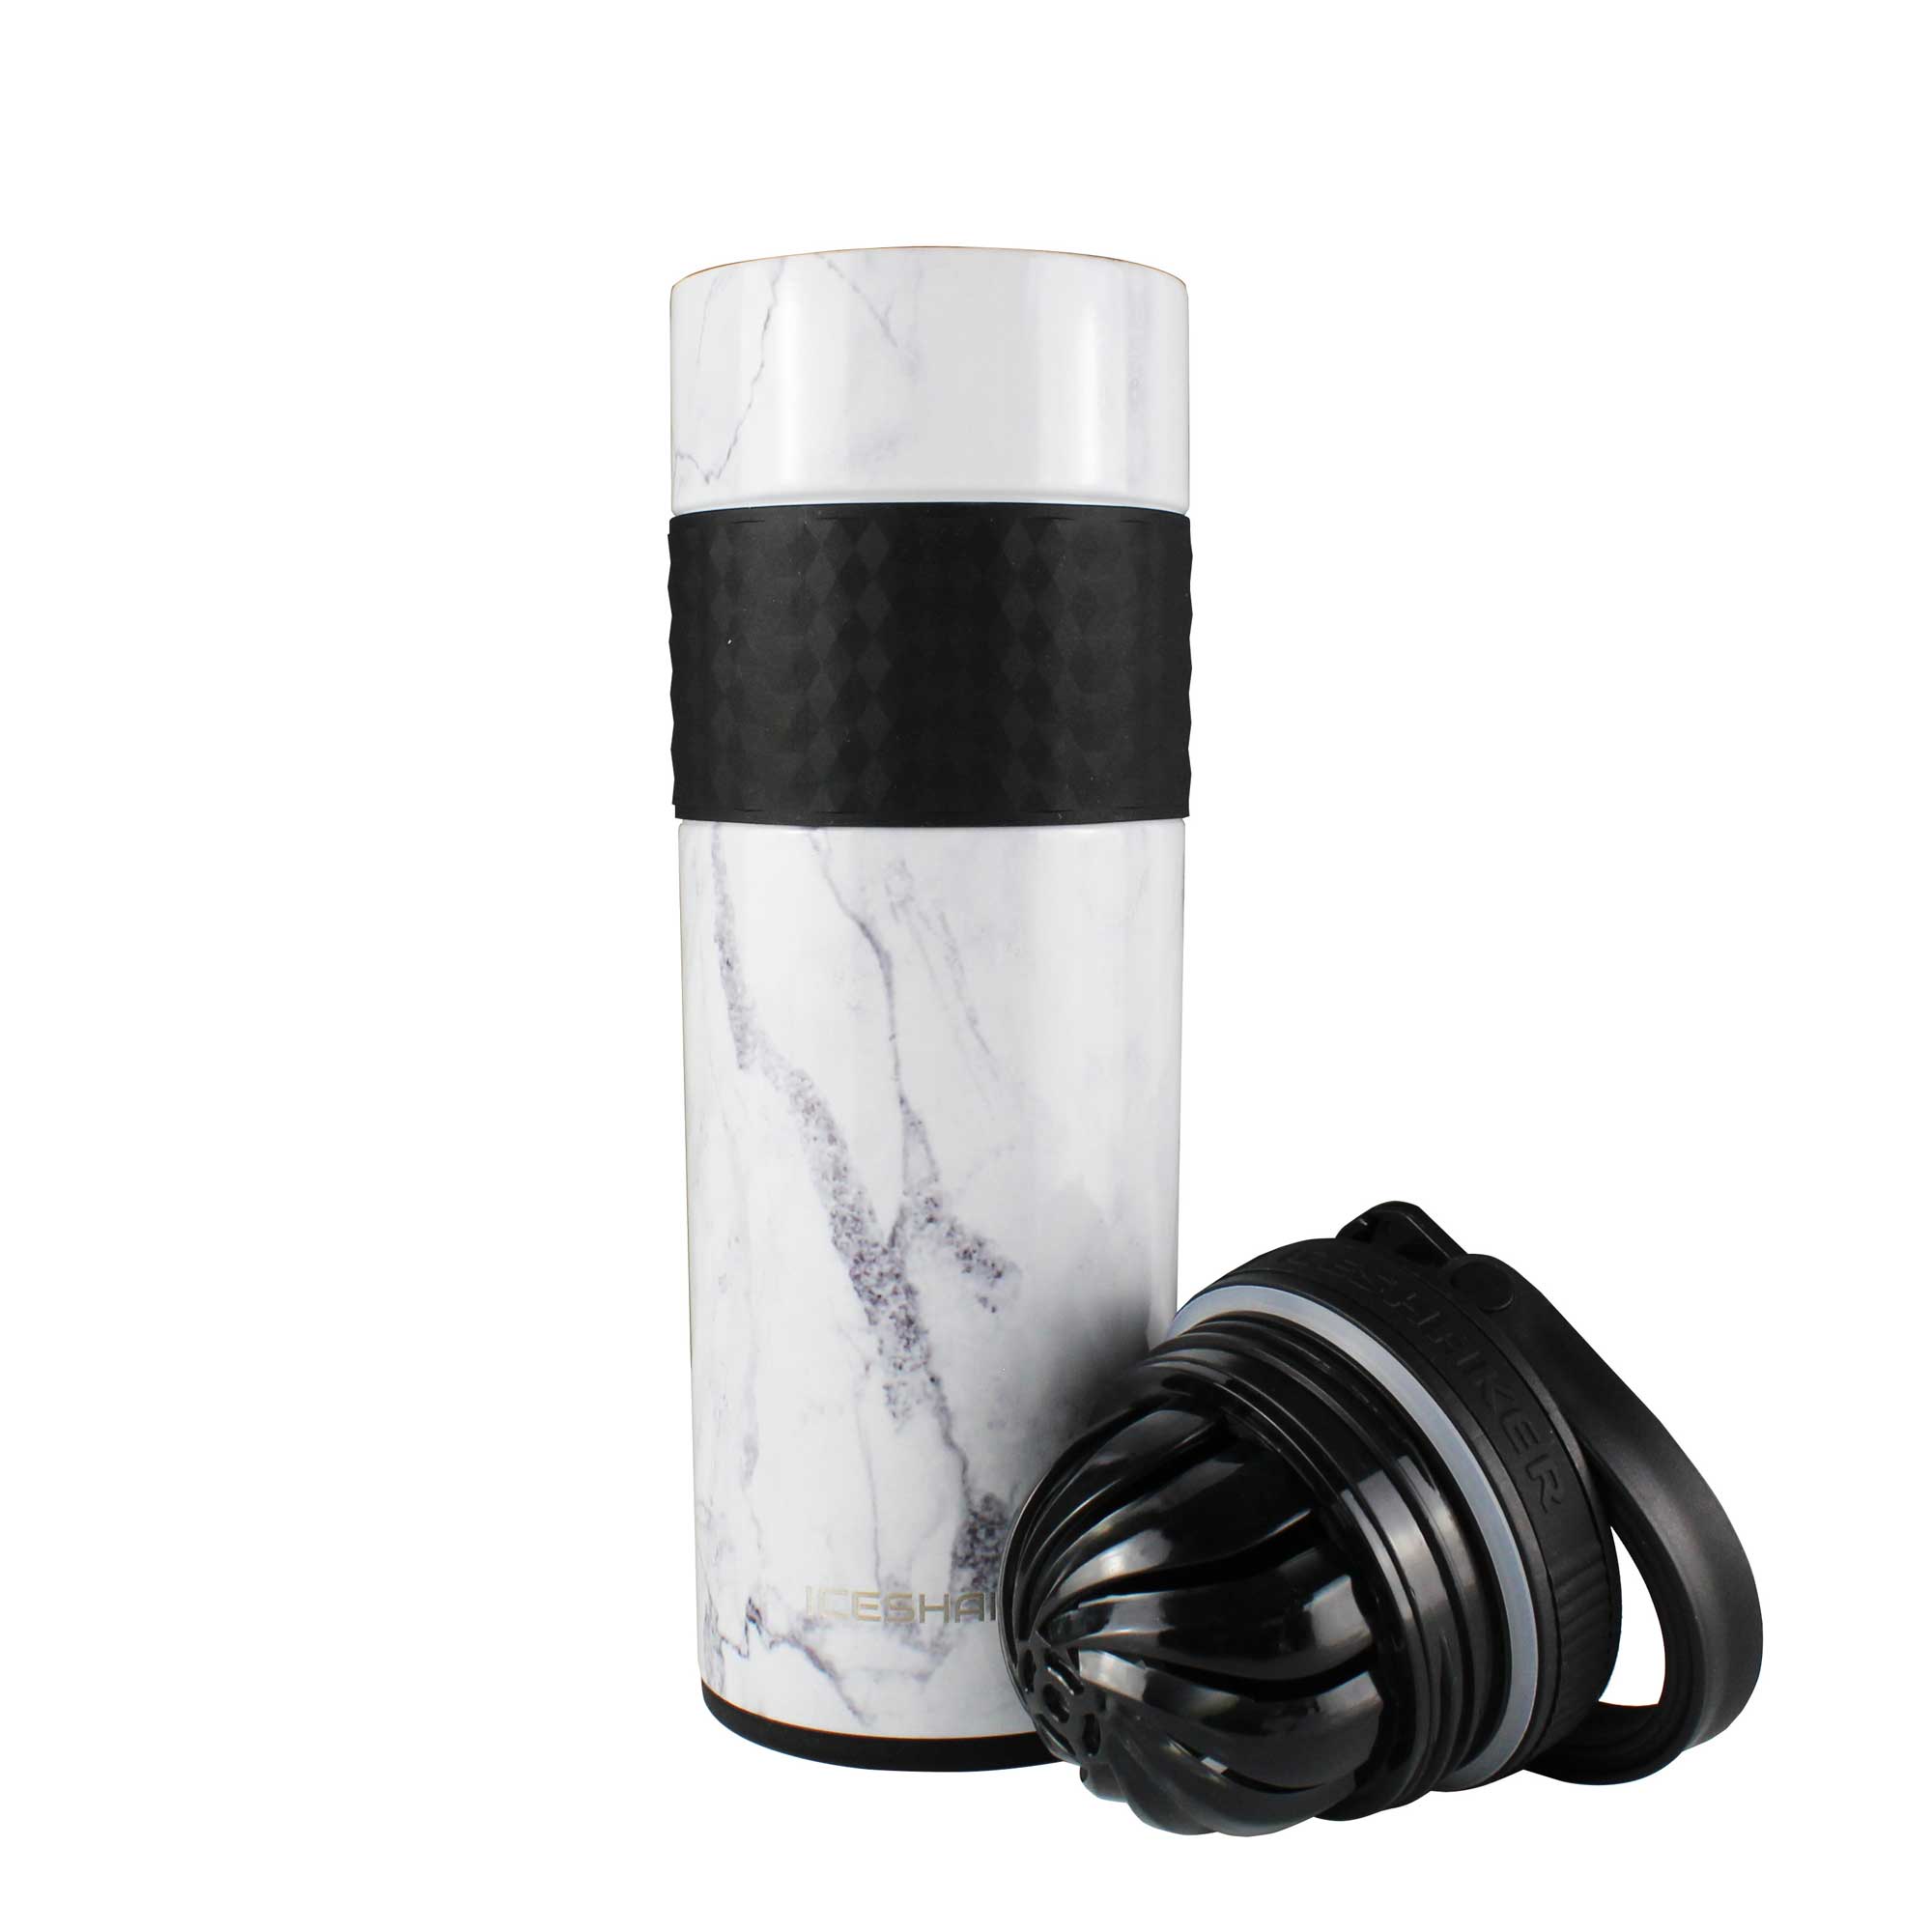 Shaker Stainless Steel 500ml White - One Size